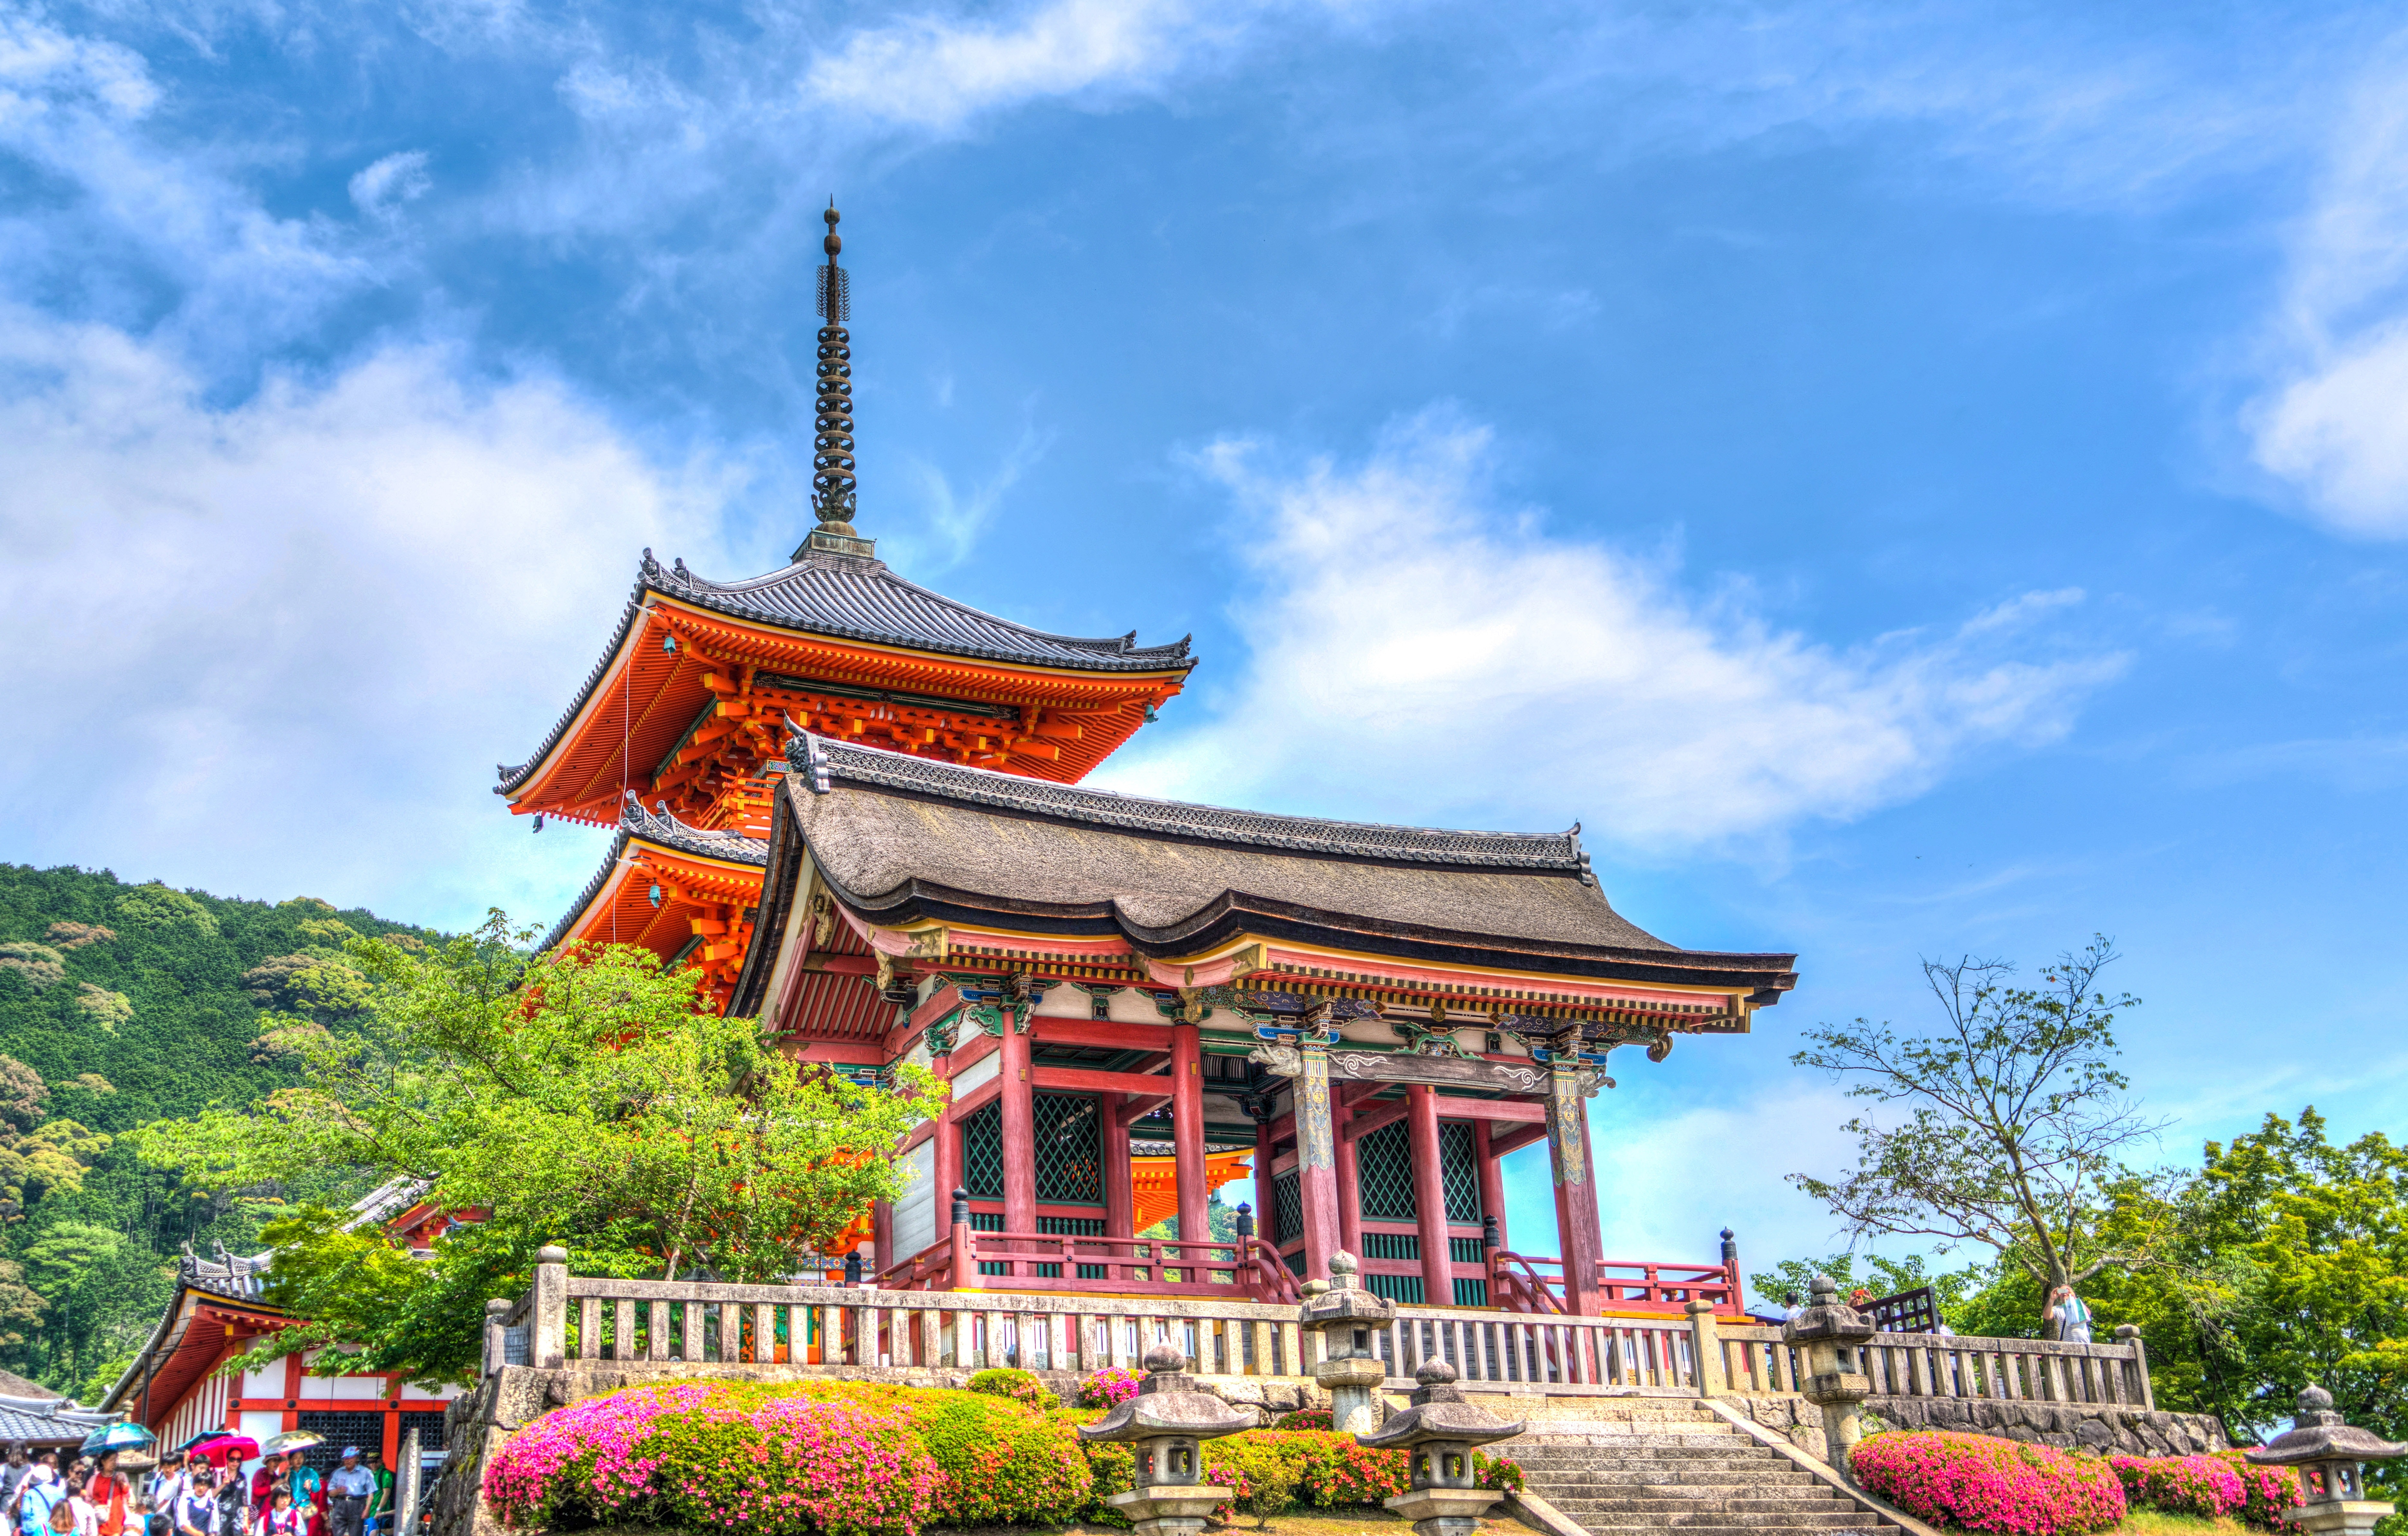 Temple on elevated area under blue sky and white clouds during daytime photo